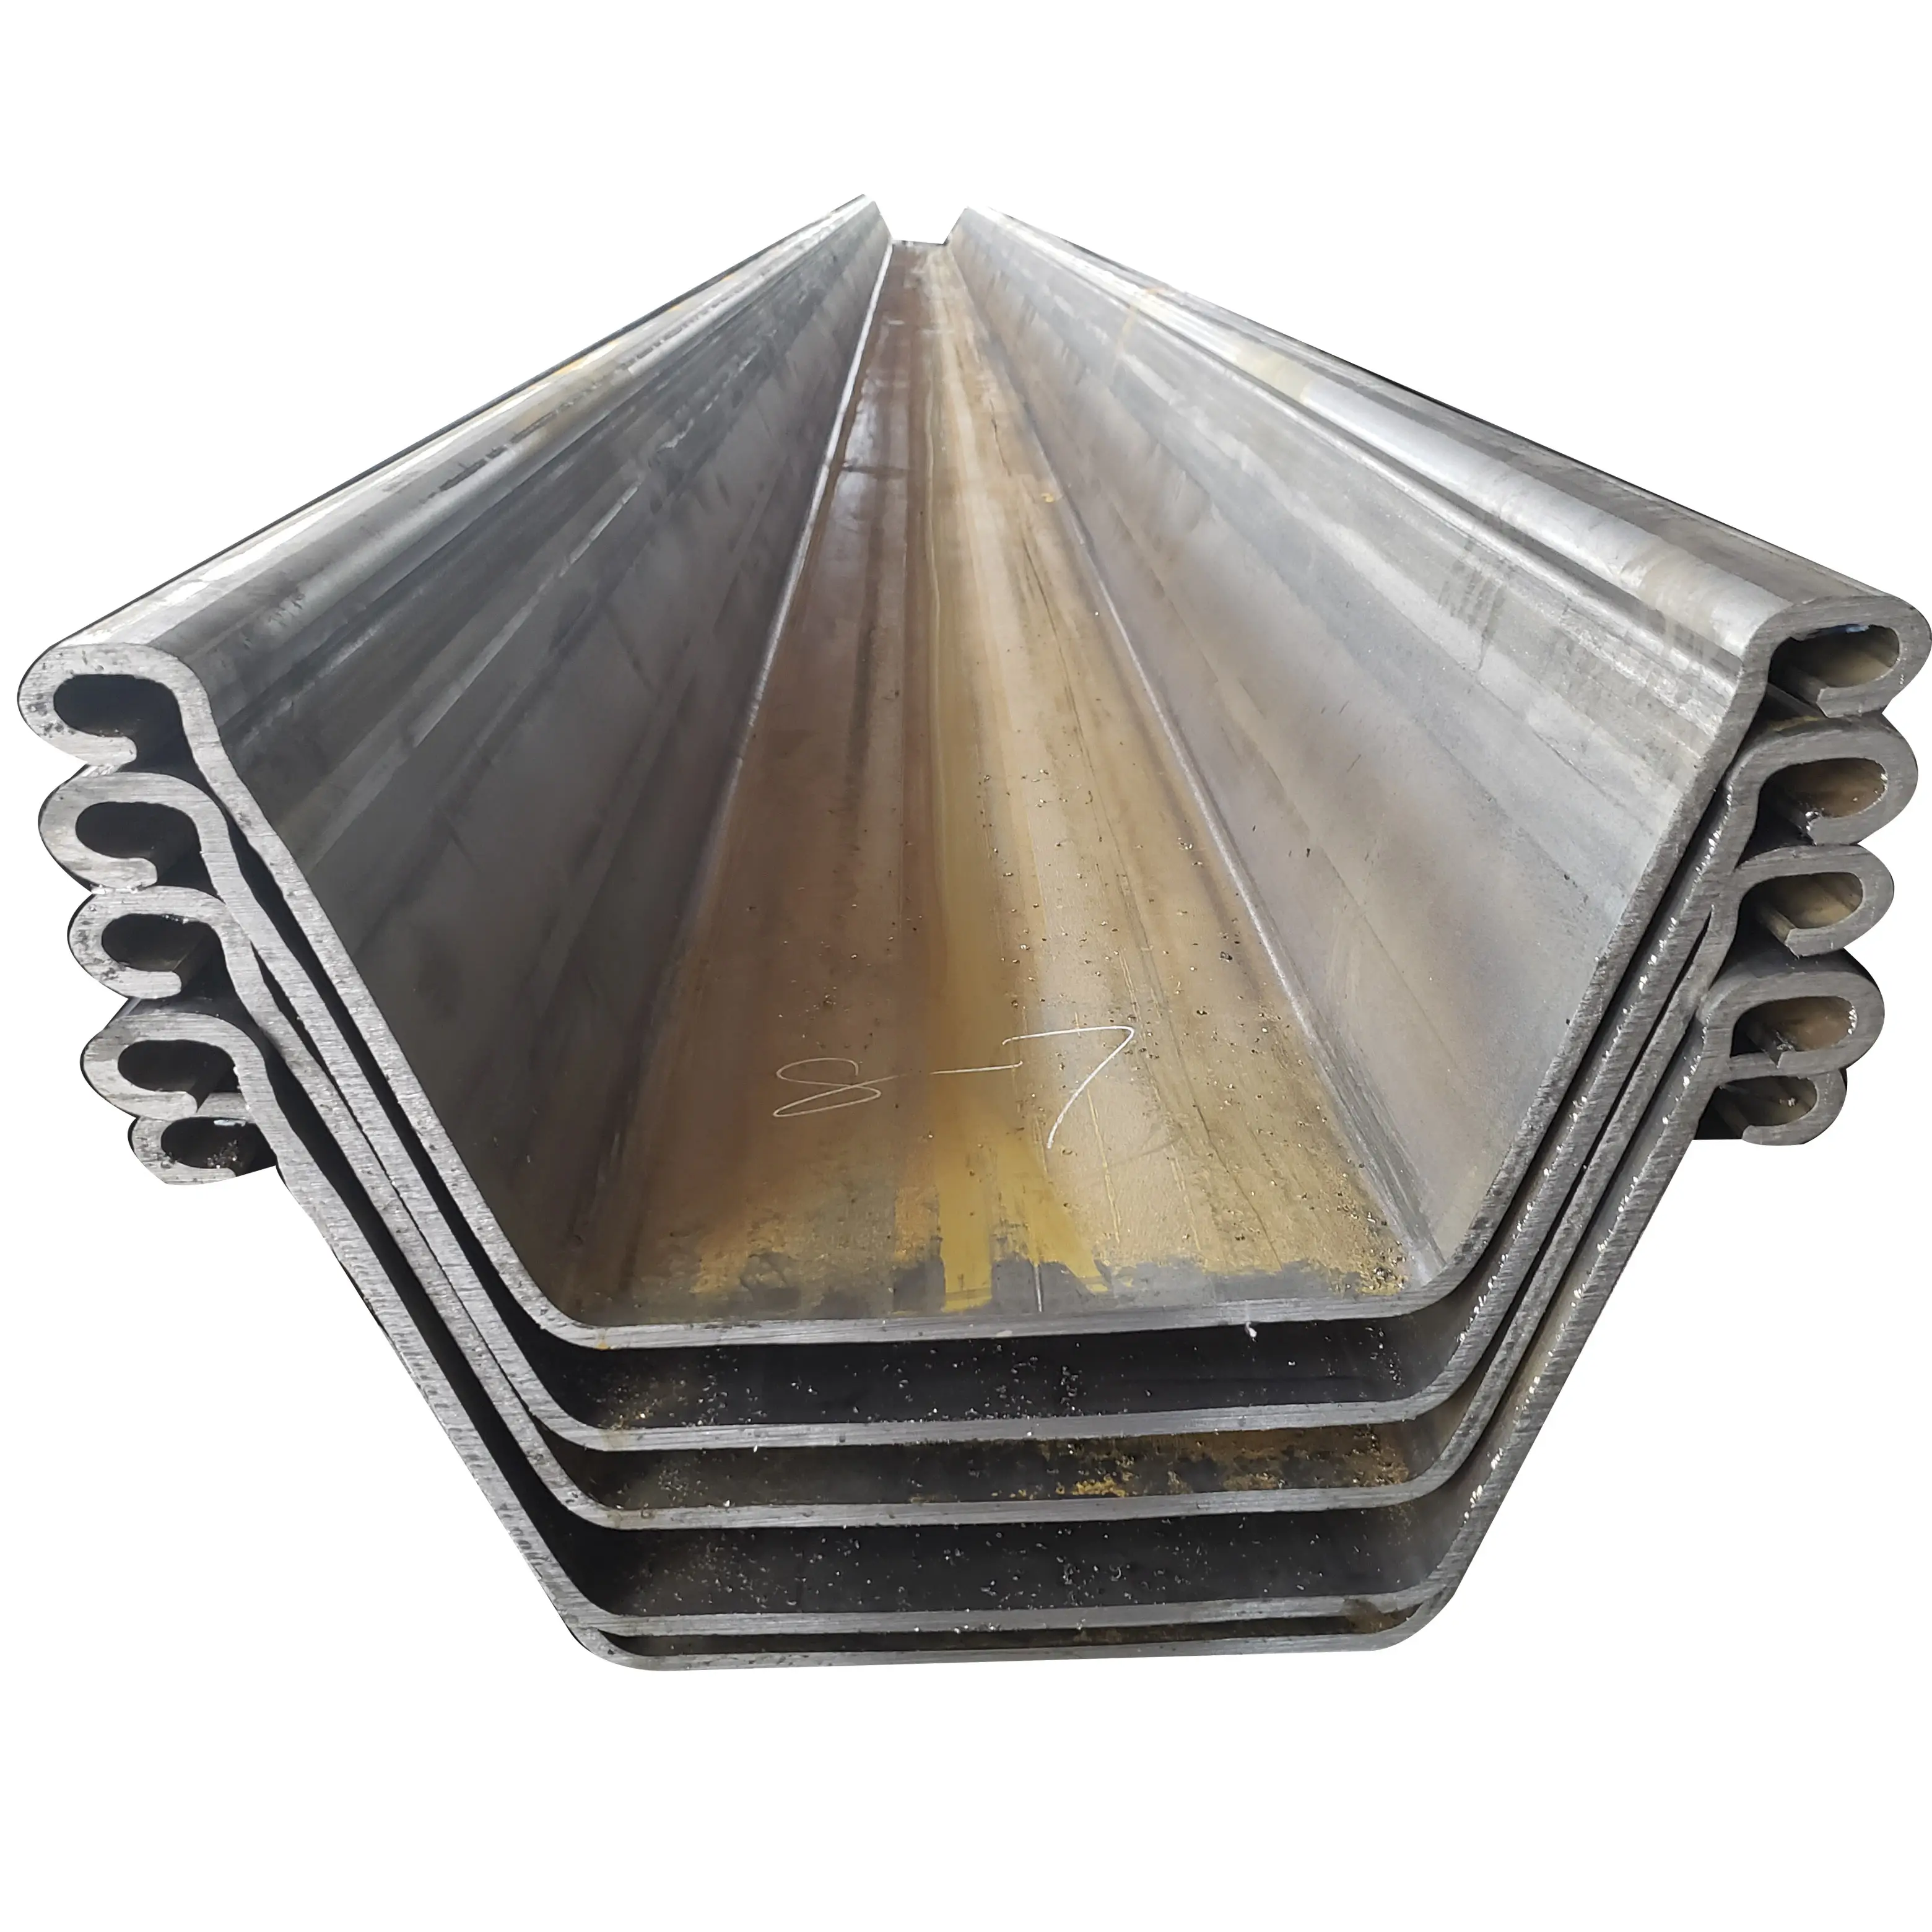 Vinyl PVC Sheet Pile High Resistance To Scratches Or Cracks